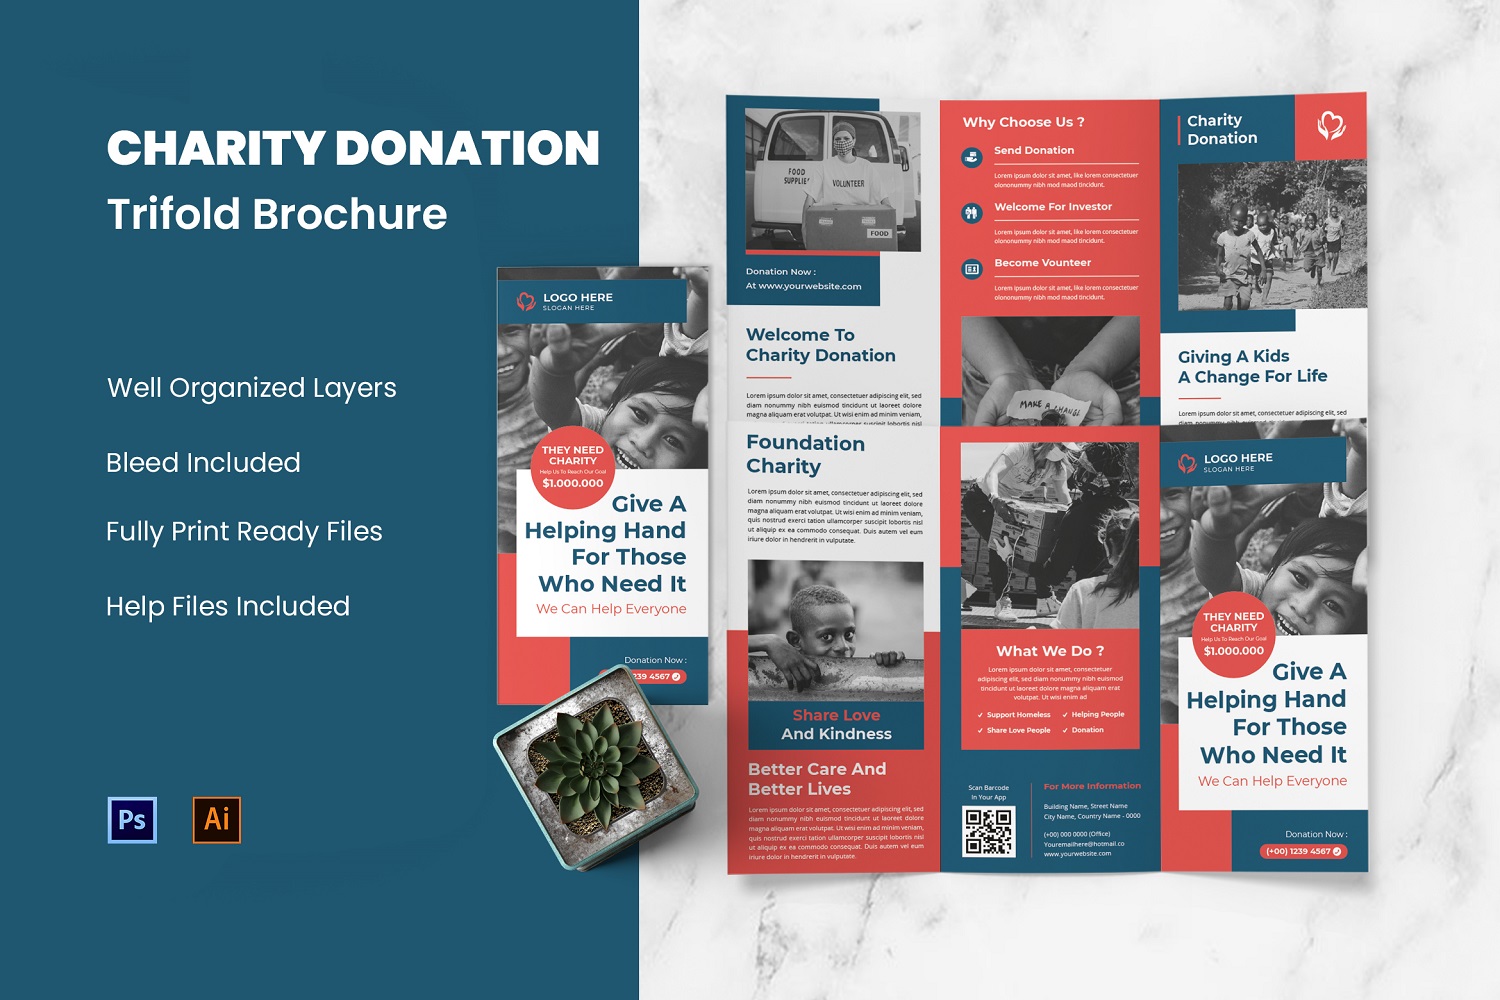 Charity Donation Trifold Brochure